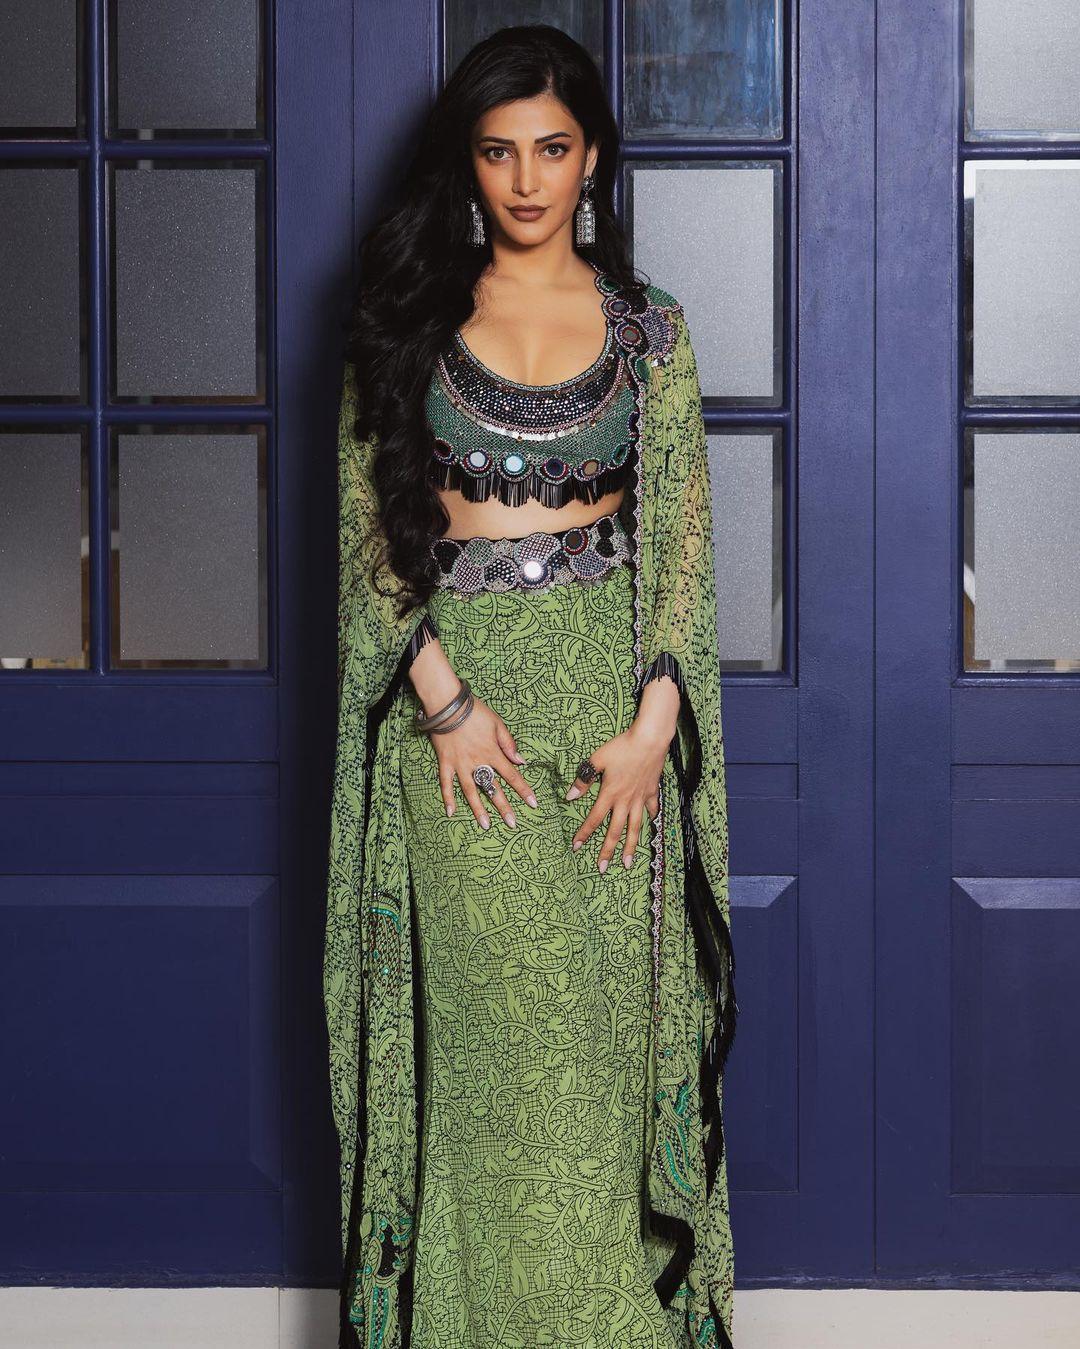 💚🐉🥝 mean green desi machine 
.
.
.
Outfit - @nupurkanoiofficial
Jewellery- @amrapalijewels
Styling - @openhousestudio.in 
Assisted by - @mithra_kandhaswaami
@sxdhksh @varshininatrajan
Glam : @prakatwork @pui_c_ammy 
shot by : @dimensions.dmns